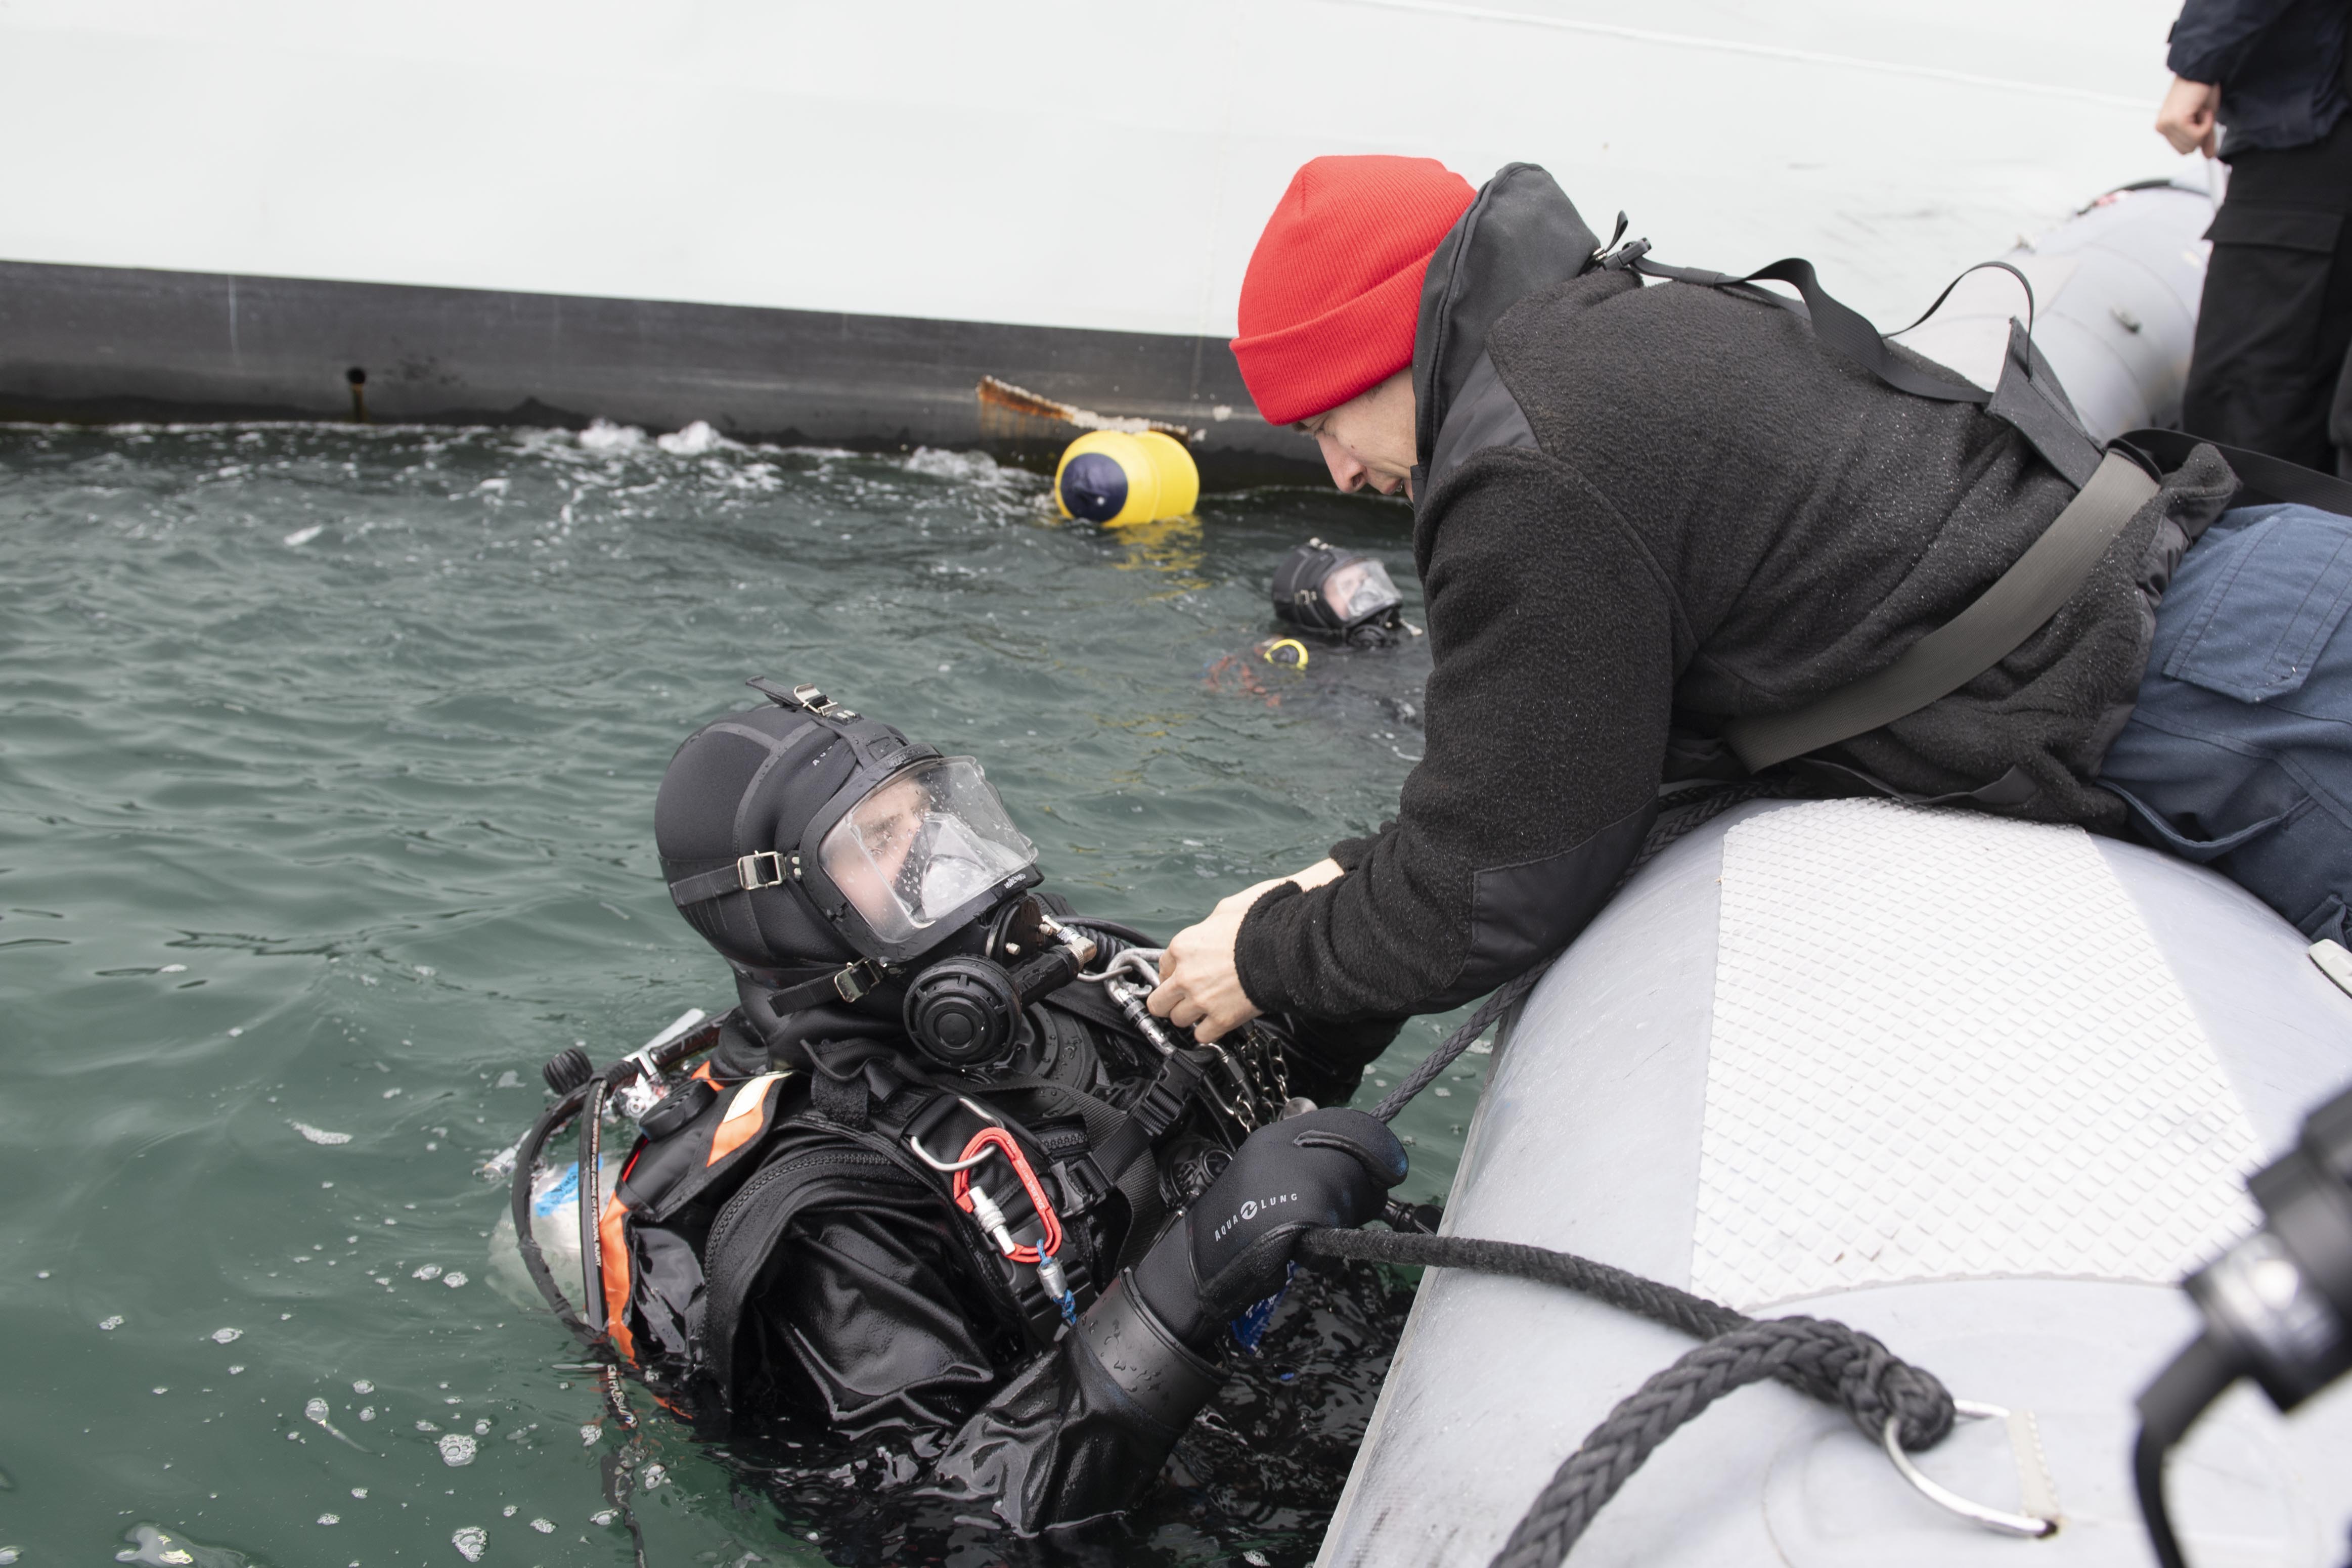 Leading Seaman (LS) Cory Taylor (right) helps LS John Kester to remove his gear at the conclusion of a diving operation at the Port of Reykjavik, Iceland